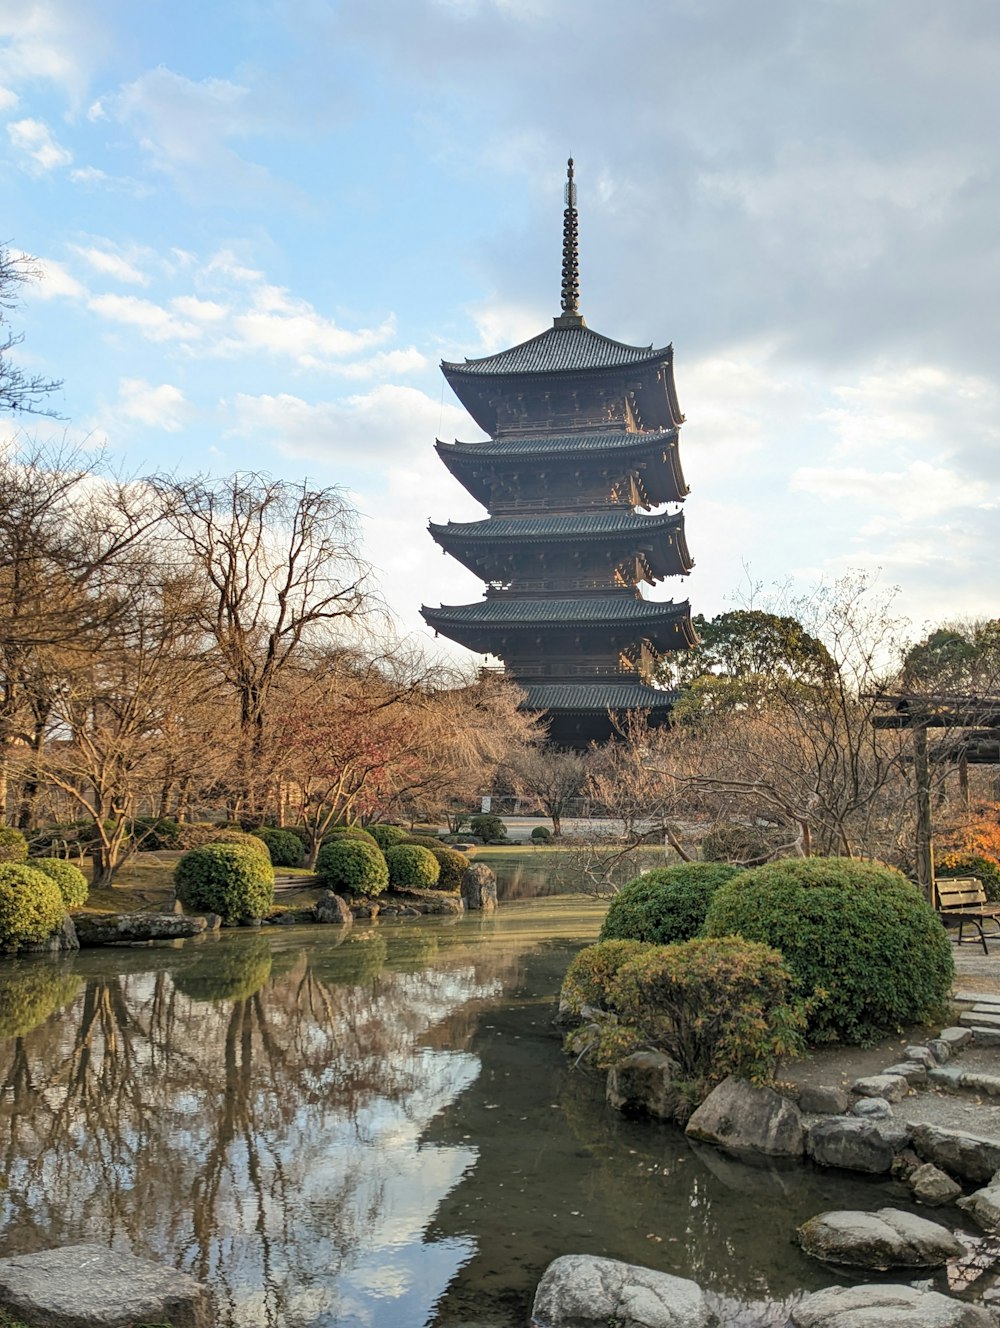 a pagoda is reflected in the water of a pond